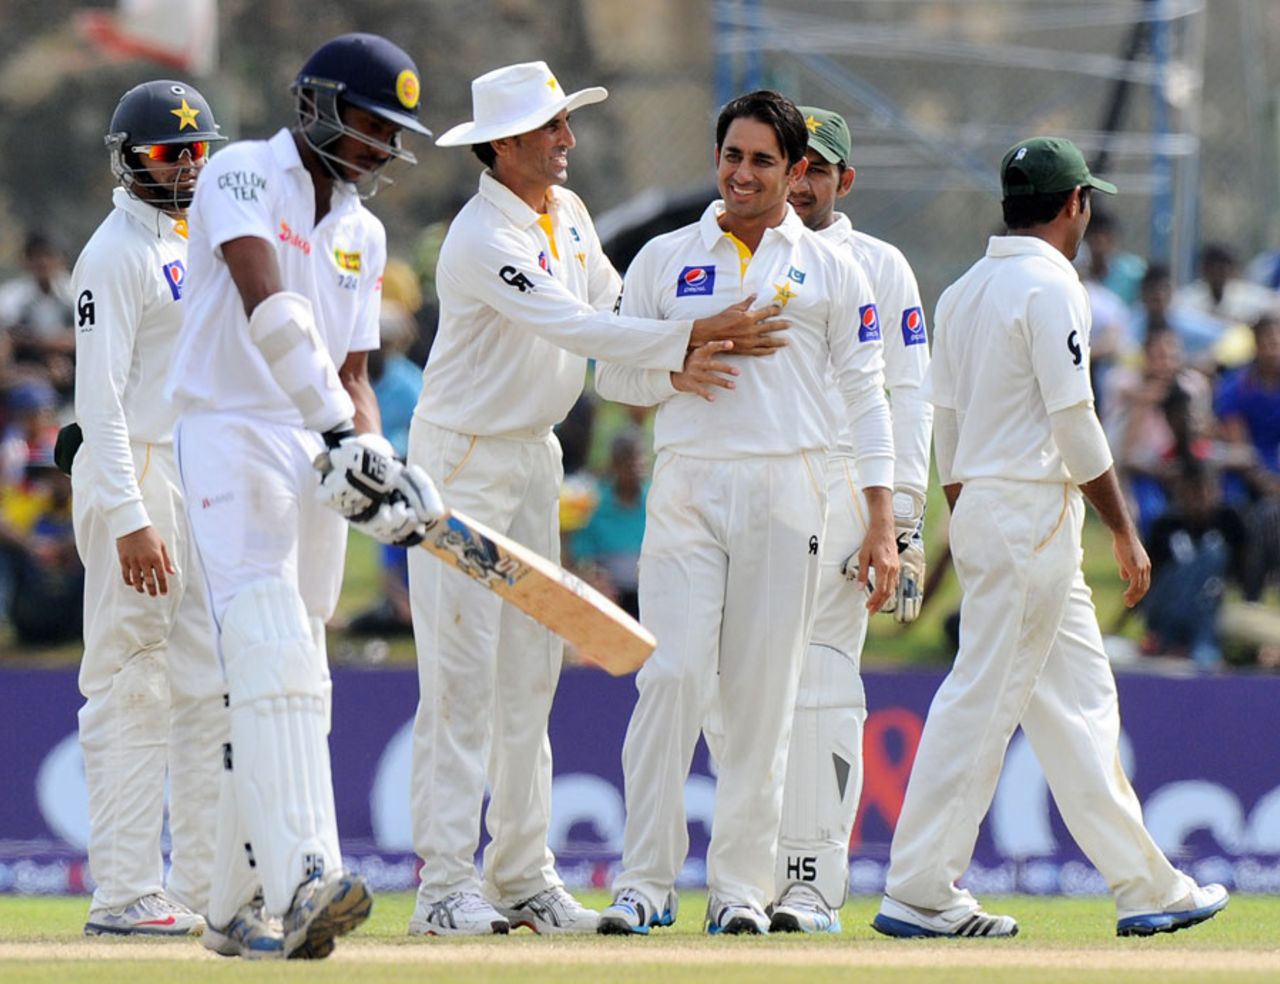 Saeed Ajmal took four quick wickets, Sri Lanka v Pakistan, 1st Test, Galle, 4th day, August 9, 2014